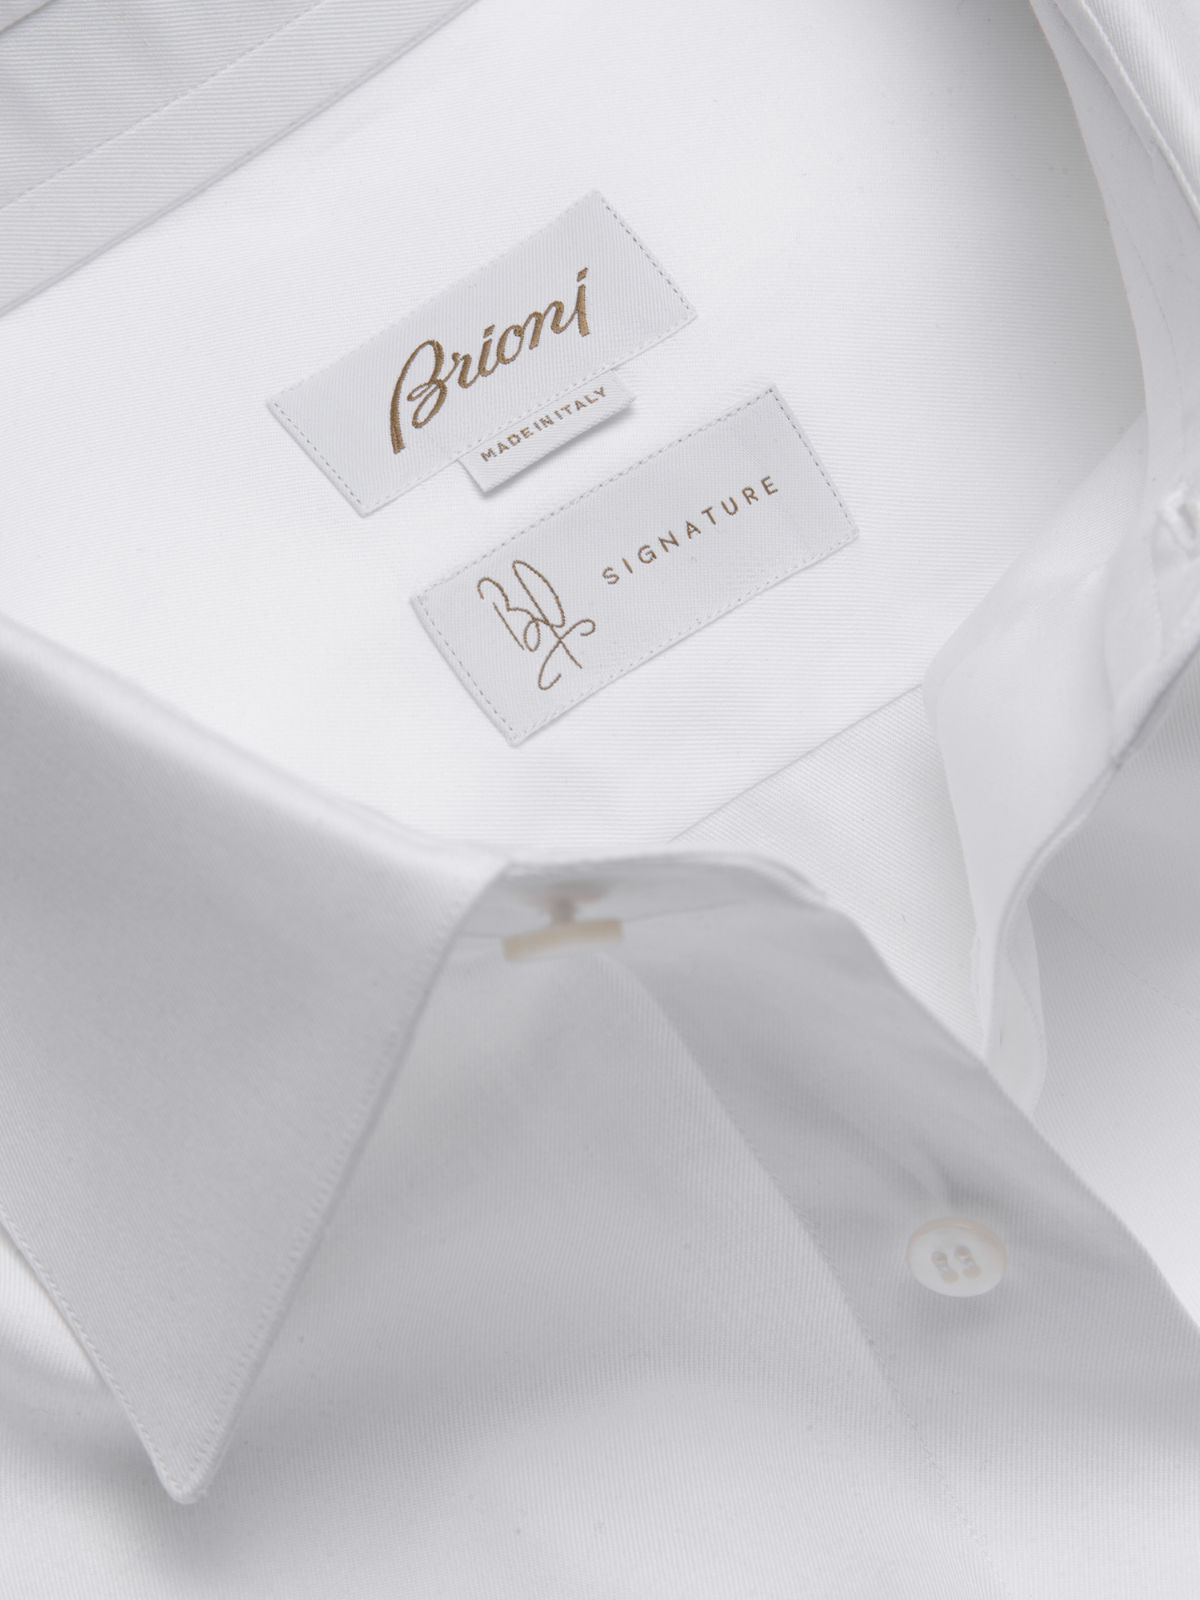 Brioni Introduces ‘BP Signature’, A Collection In Collaboration With Brad Pitt